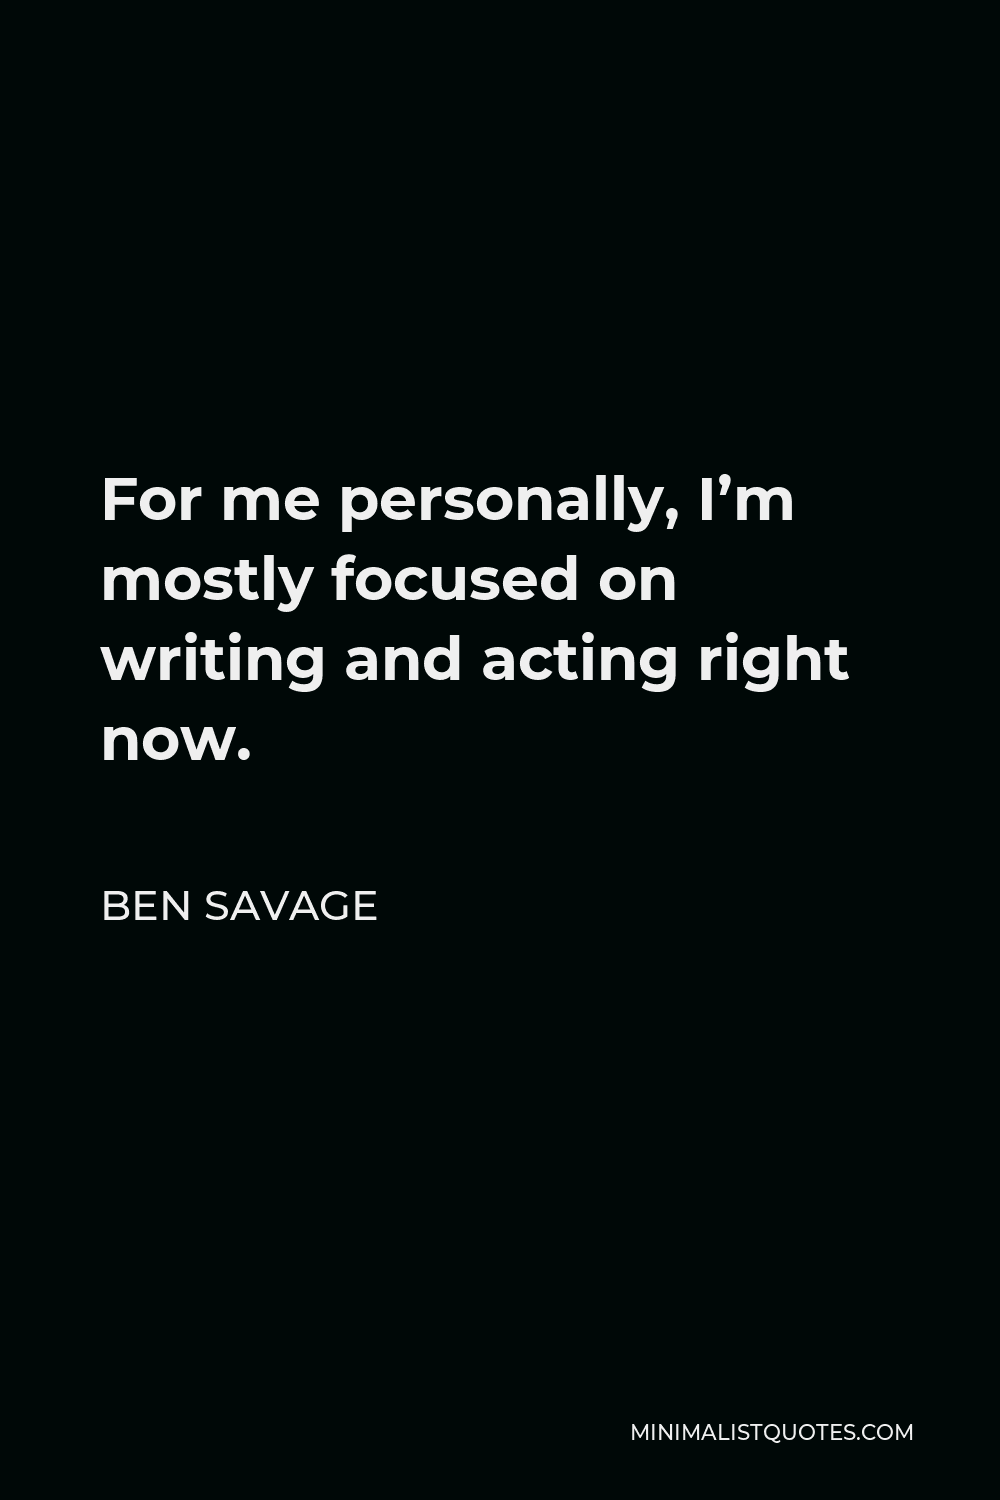 Ben Savage Quote - For me personally, I’m mostly focused on writing and acting right now.